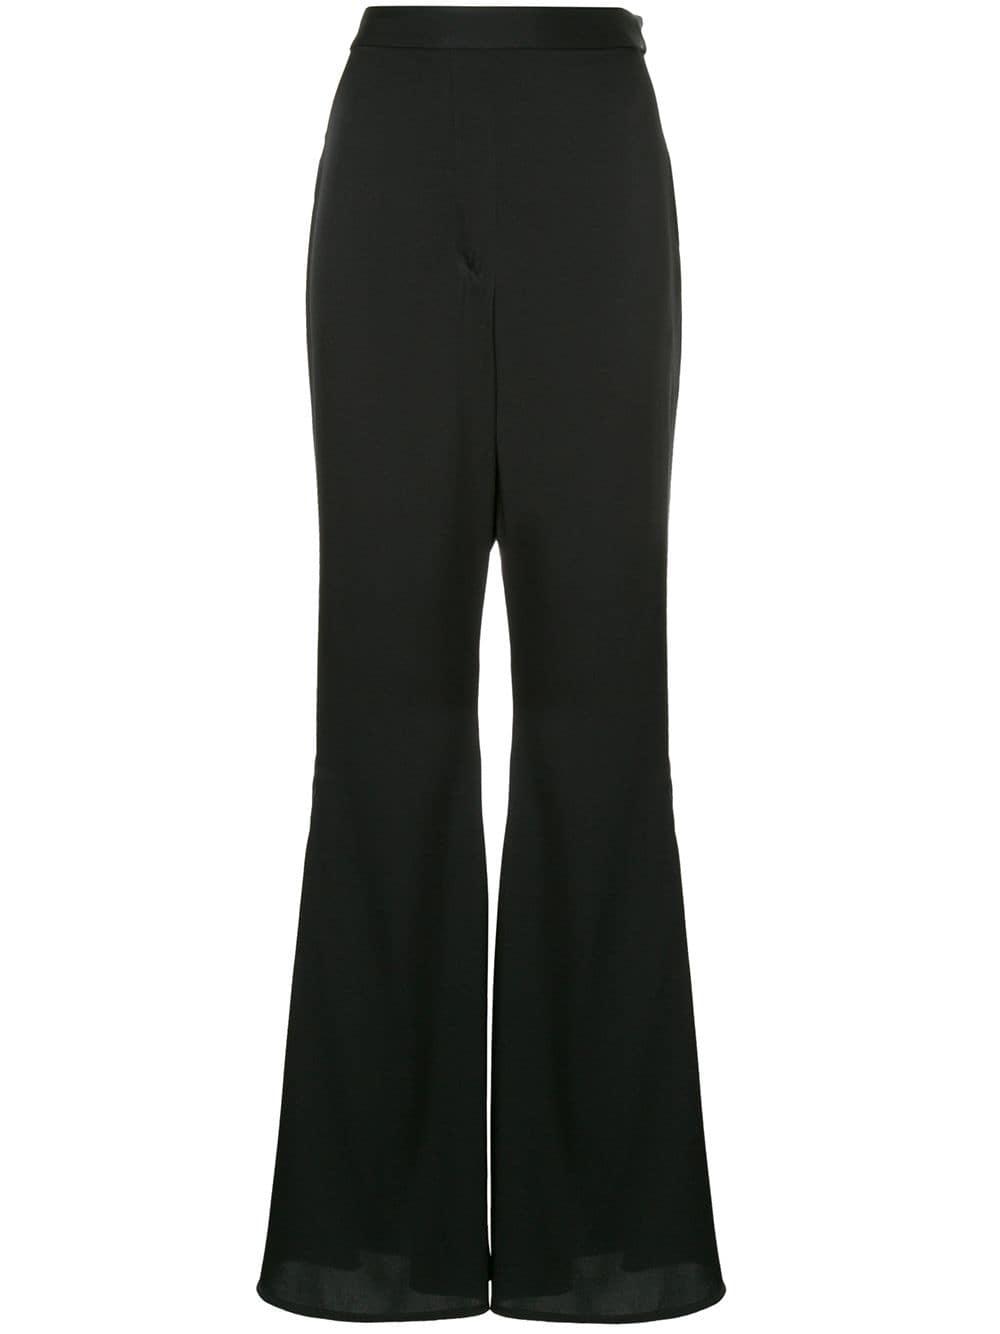 Ellery Silk High-waisted Flared Trousers in Black - Lyst